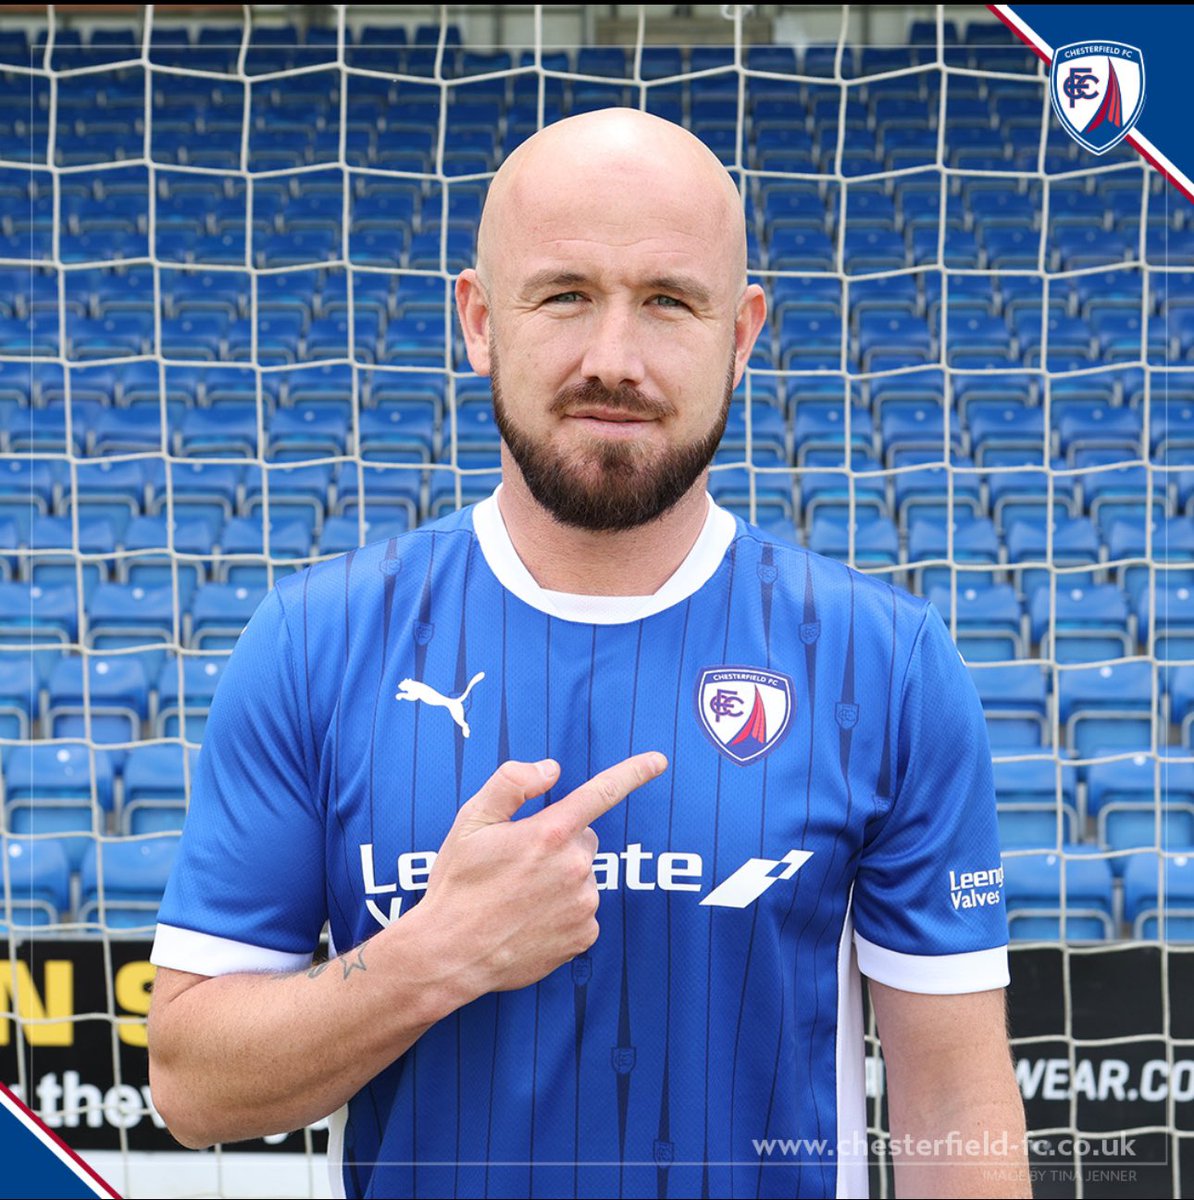 Delighted to sign for @ChesterfieldFC looking forward to working hard with the group to bring more success to the club Up The Spireites (not chezzy) 😂